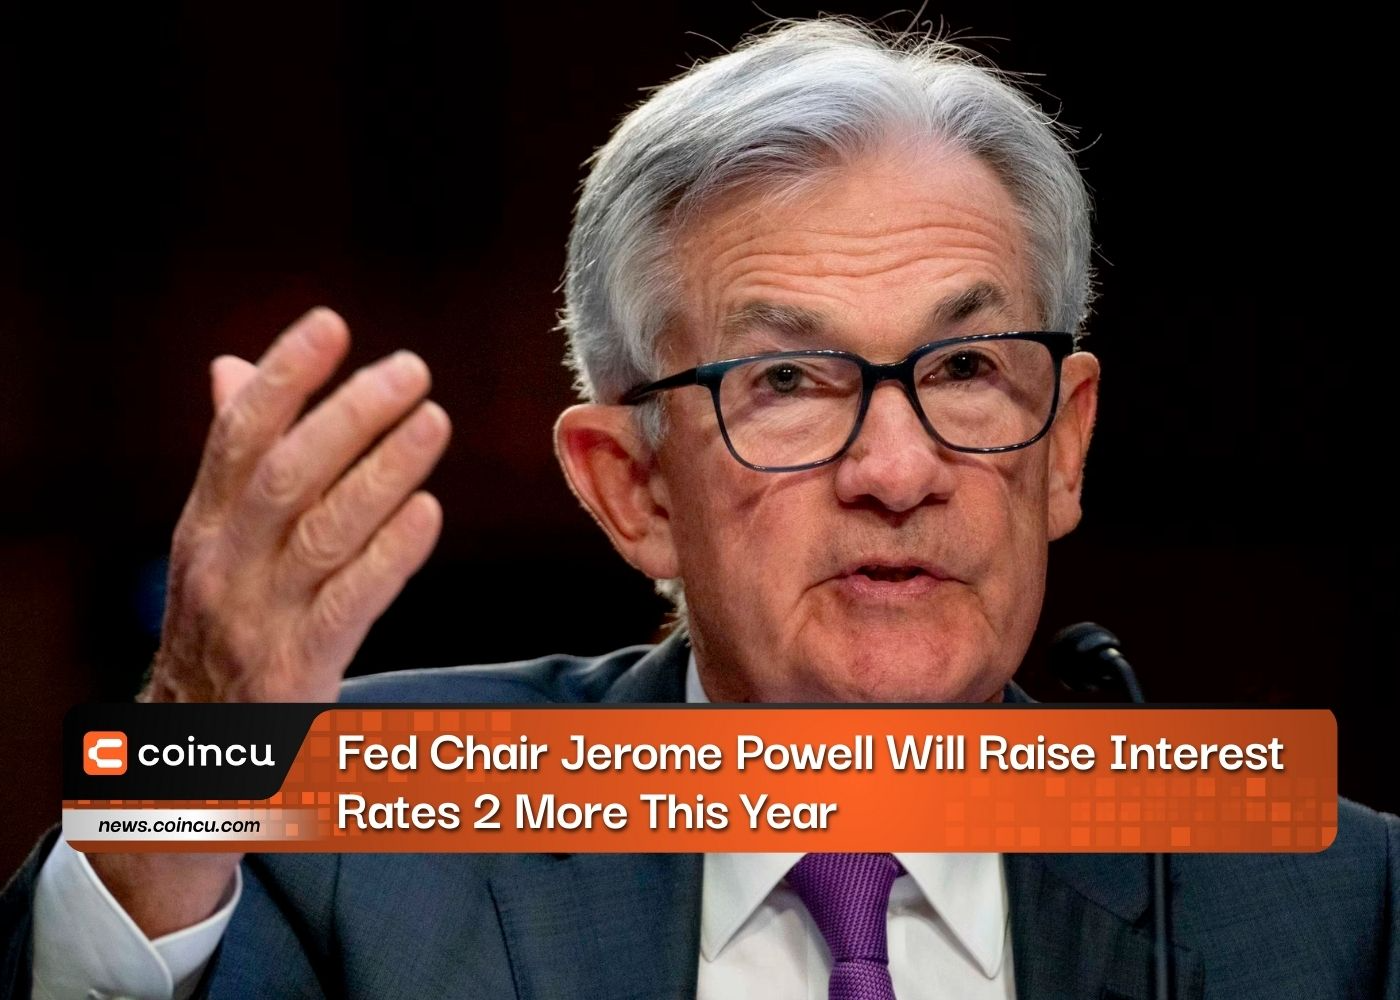 Fed Chair Jerome Powell Will Raise Interest Rates 2 More This Year, BTC Drops Below $30,000